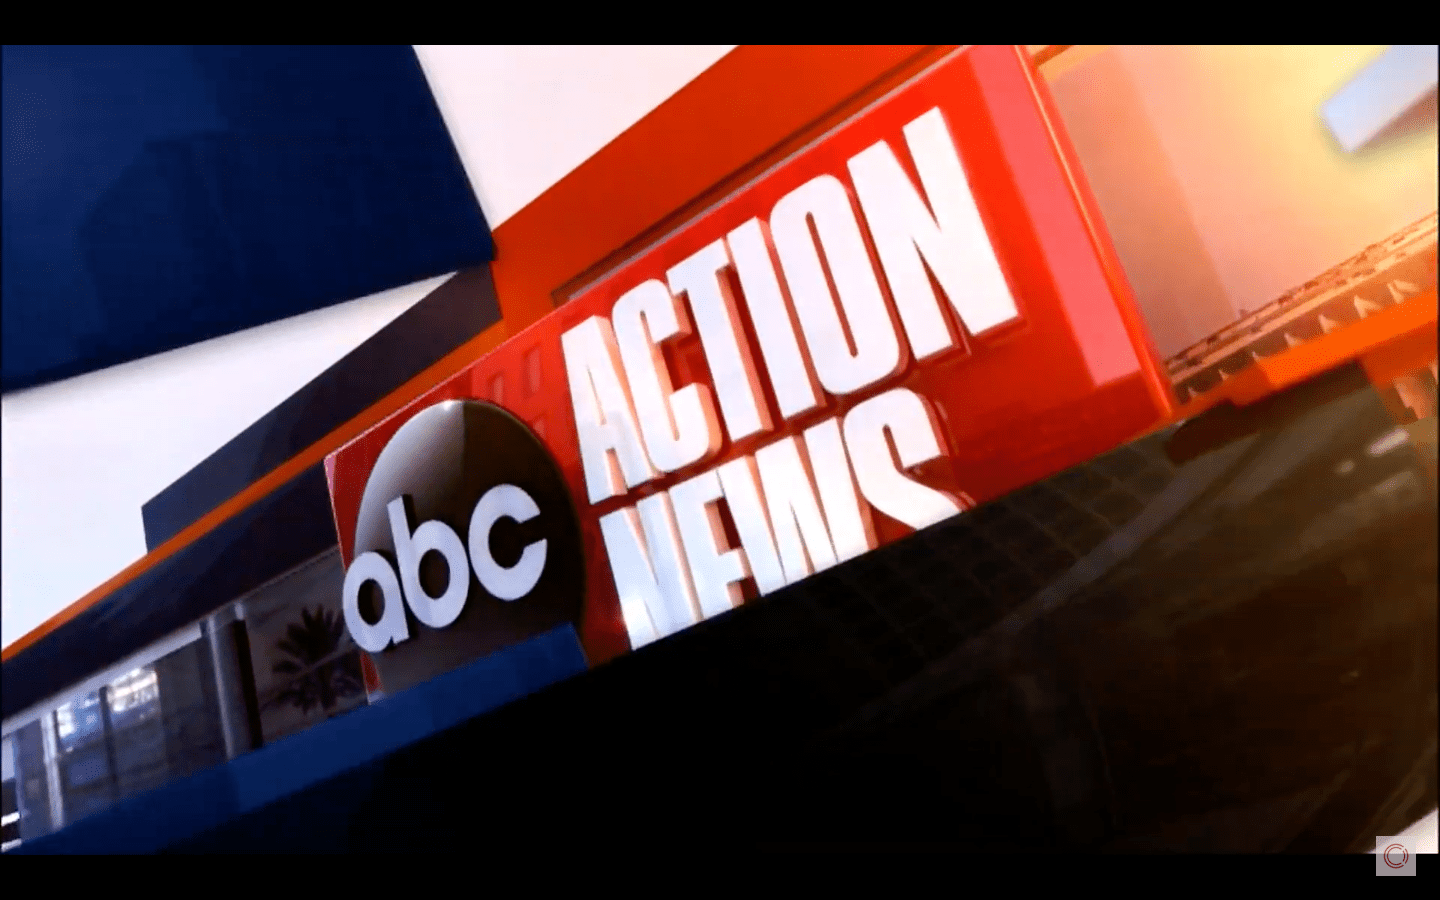 ABC Action News – Tampa Police x Laundry Project Story